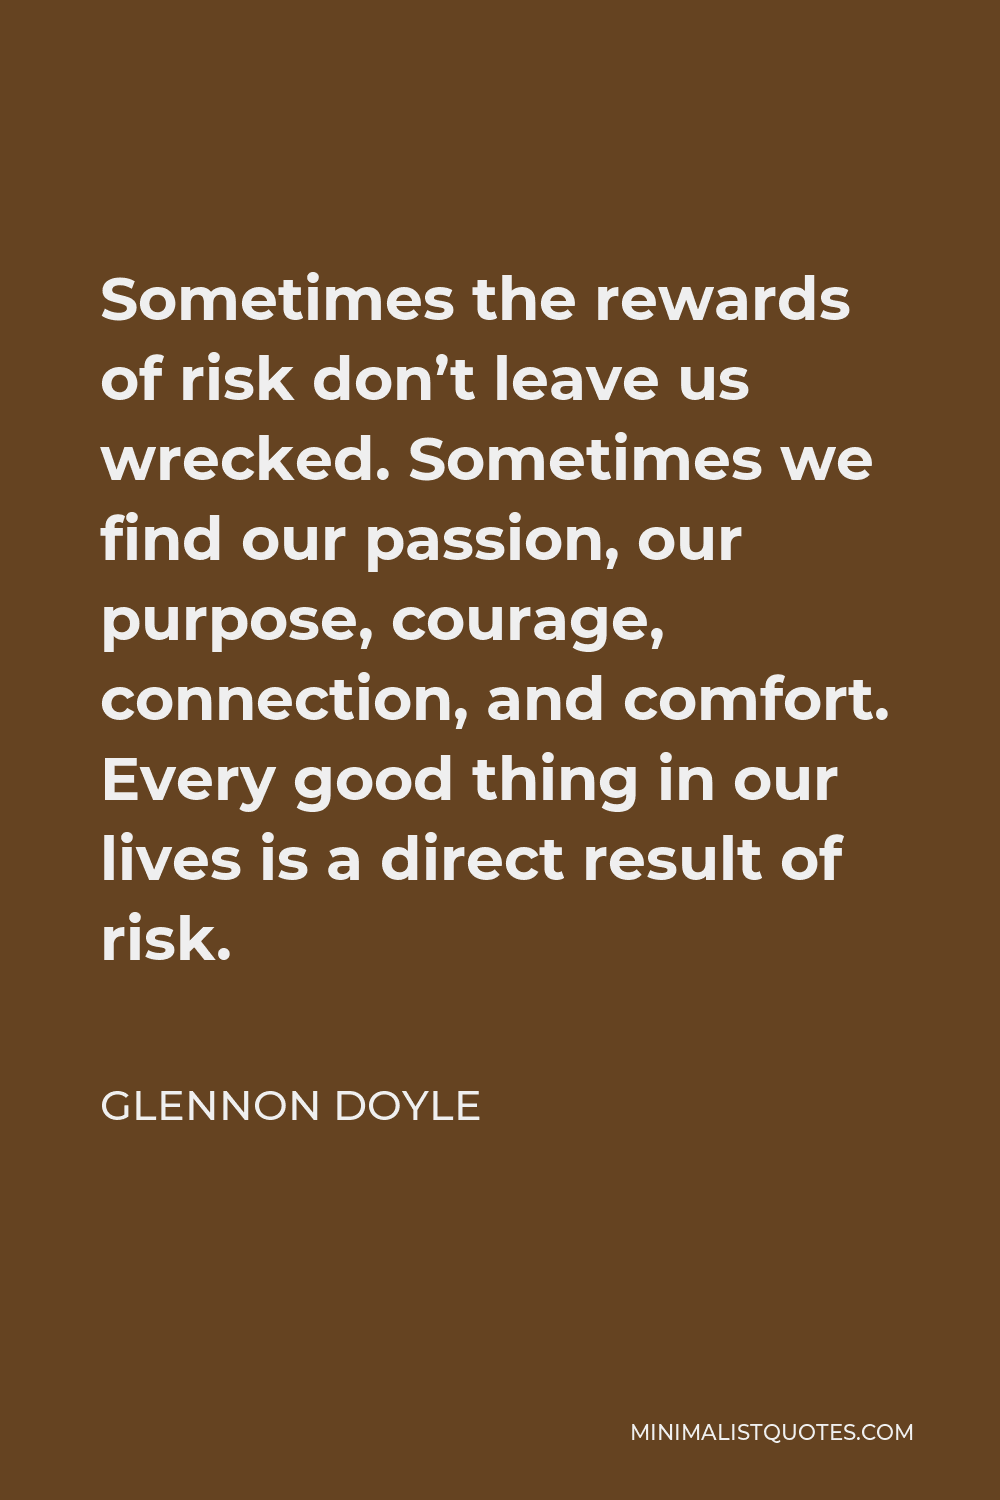 Glennon Doyle Quote - Sometimes the rewards of risk don’t leave us wrecked. Sometimes we find our passion, our purpose, courage, connection, and comfort. Every good thing in our lives is a direct result of risk.